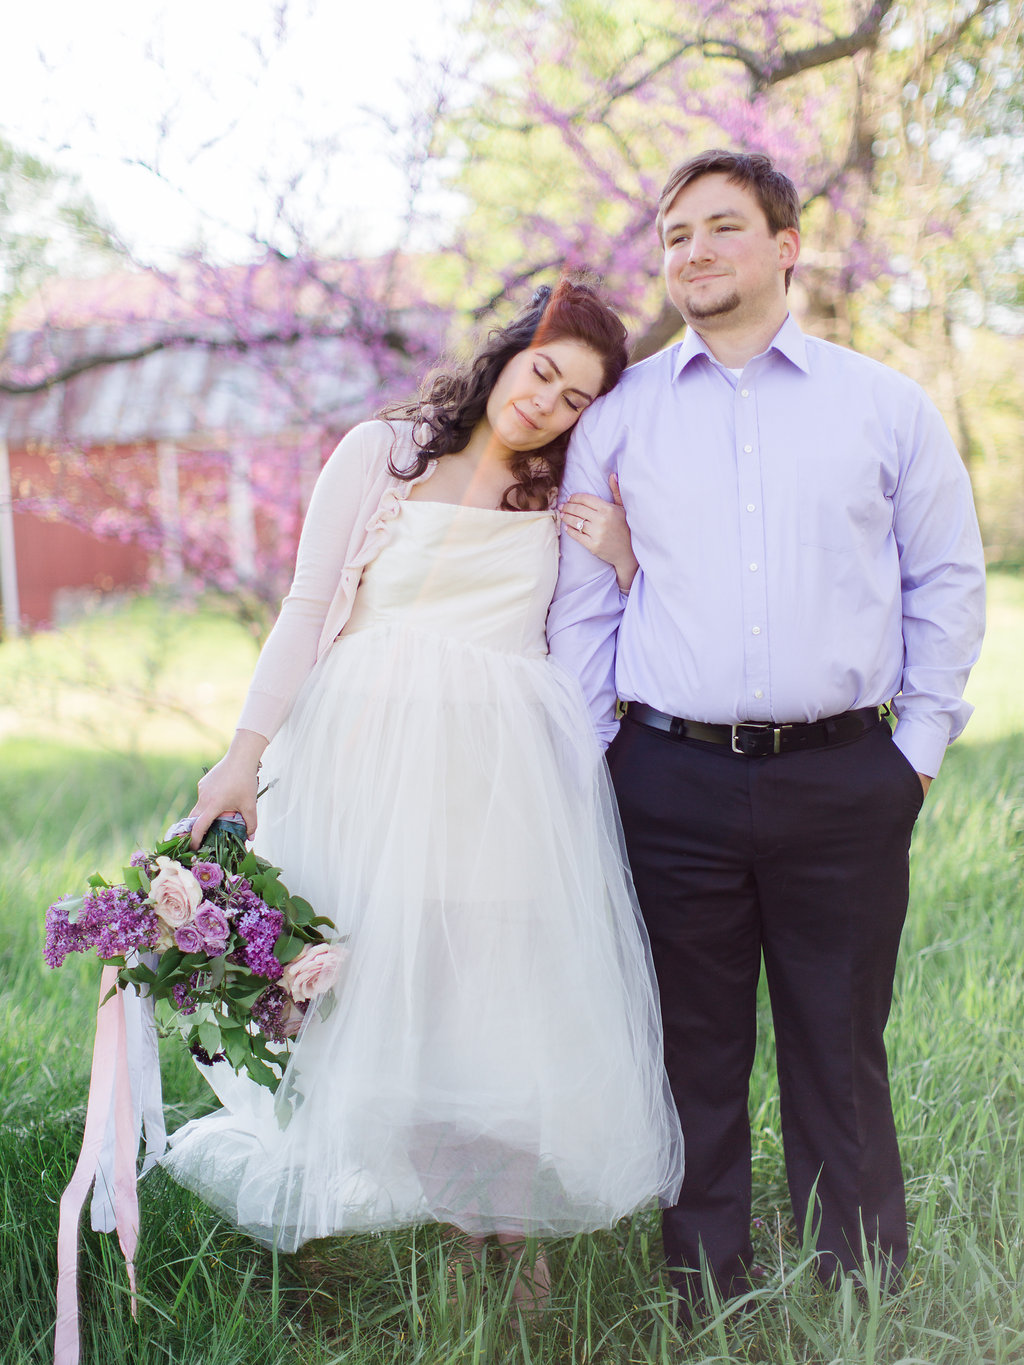 Spring Engagment Photo Session | The Day's Design | Ashley Slater Photography